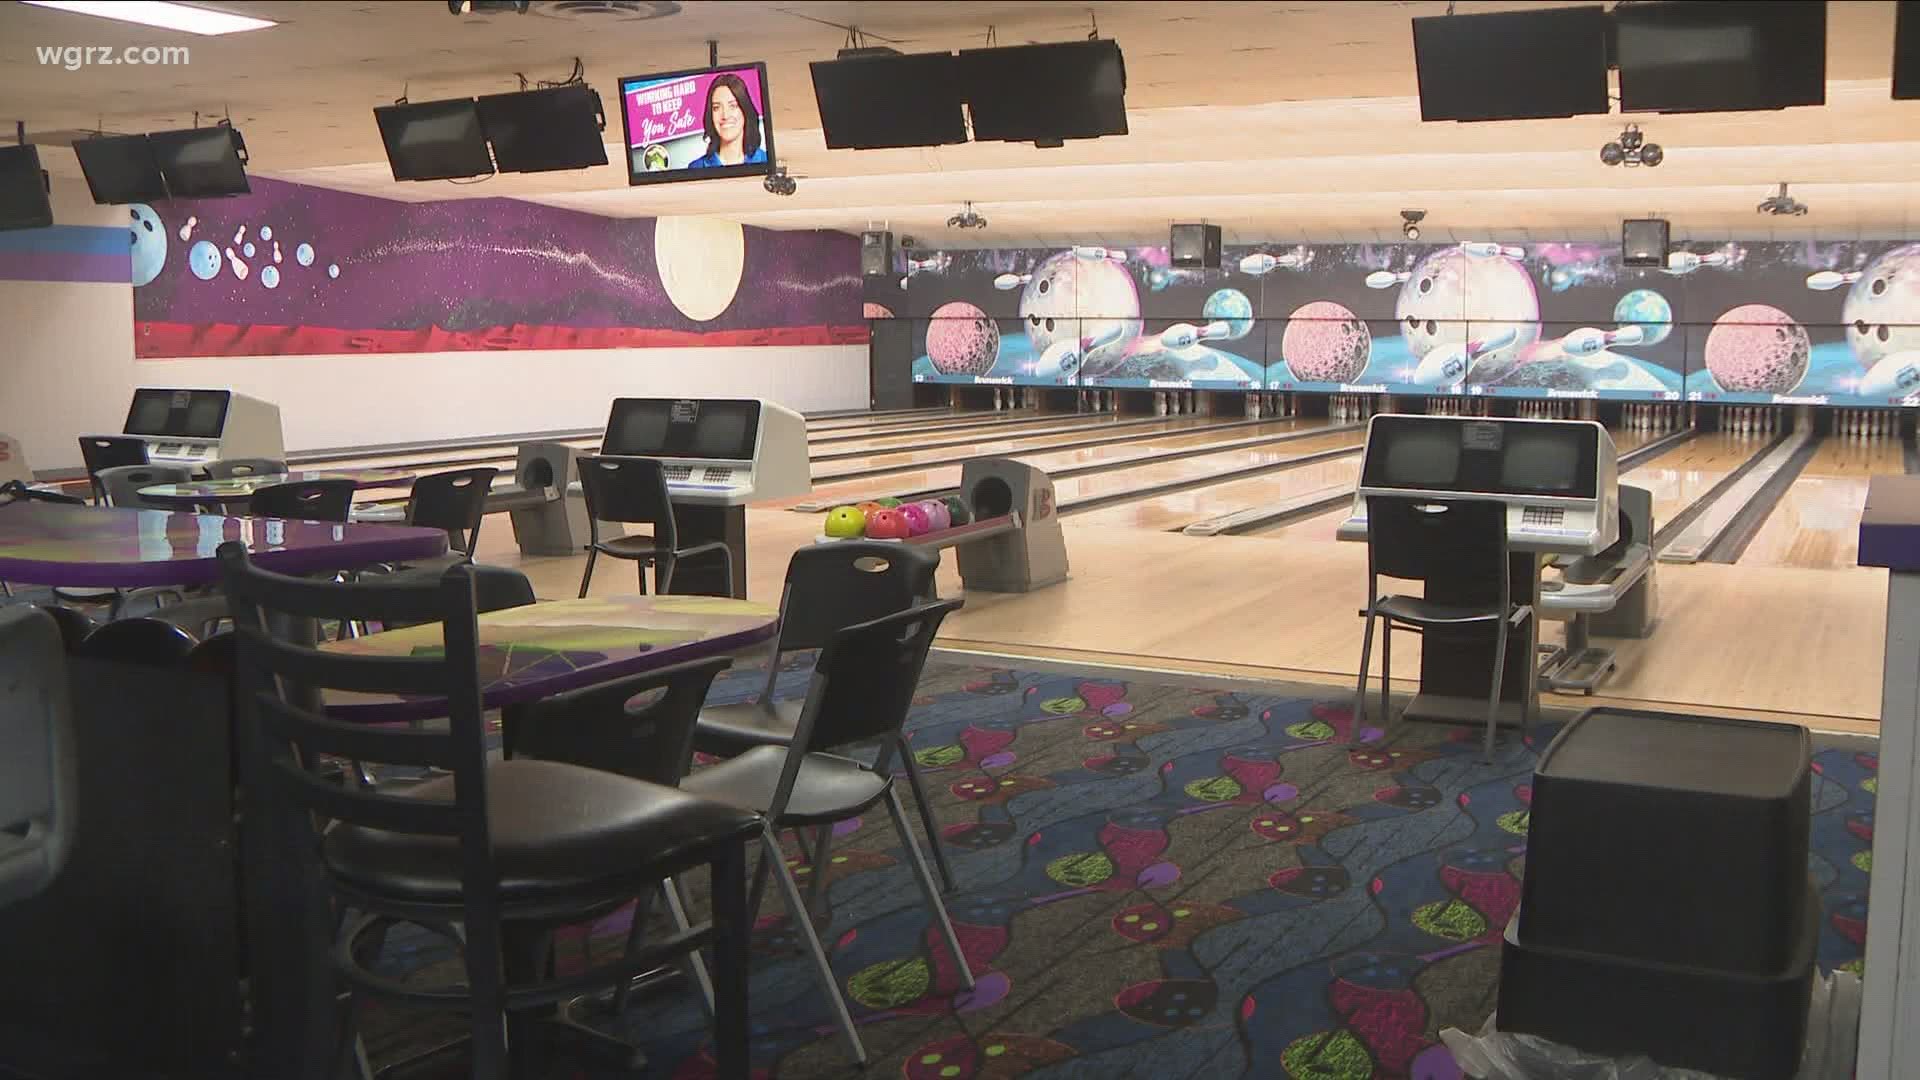 Governor Cuomo announced today that bowling alleys will be allowed to resume operating on Monday. He also indicated that gyms and fitness centers may follow soon.